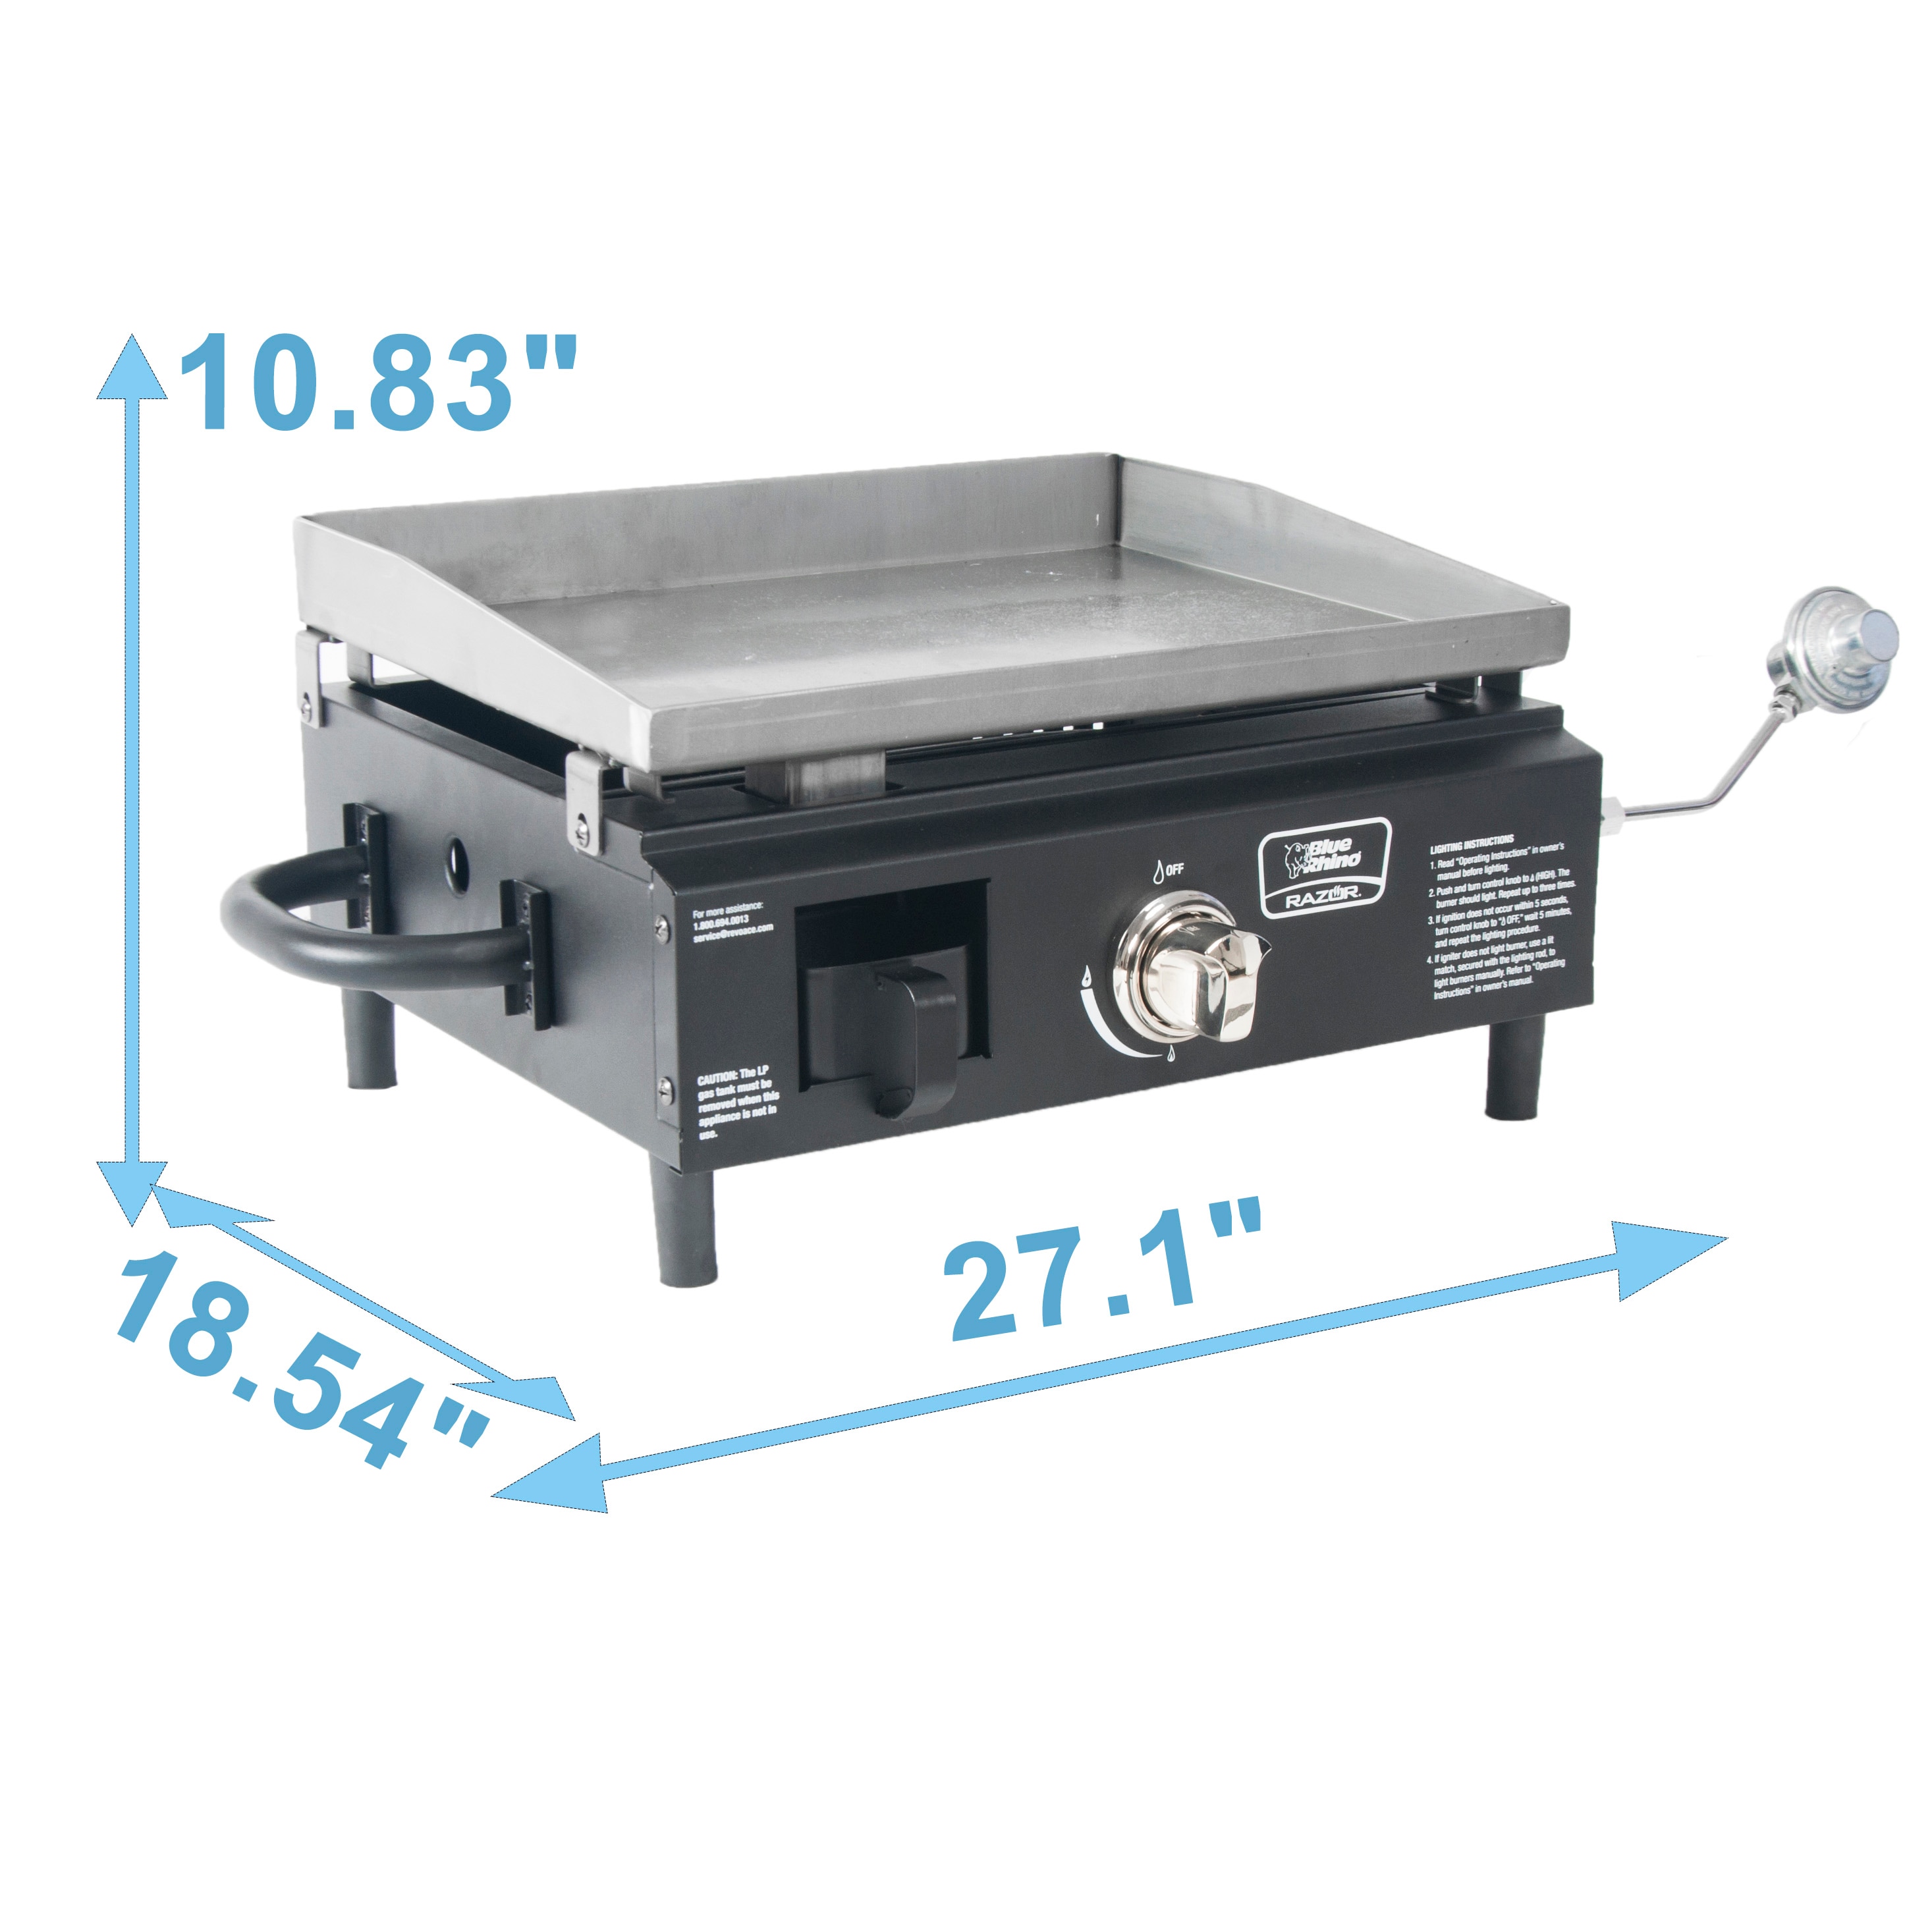 Flat Top Griddle (Large) - Shop The Silver Rocket Grill